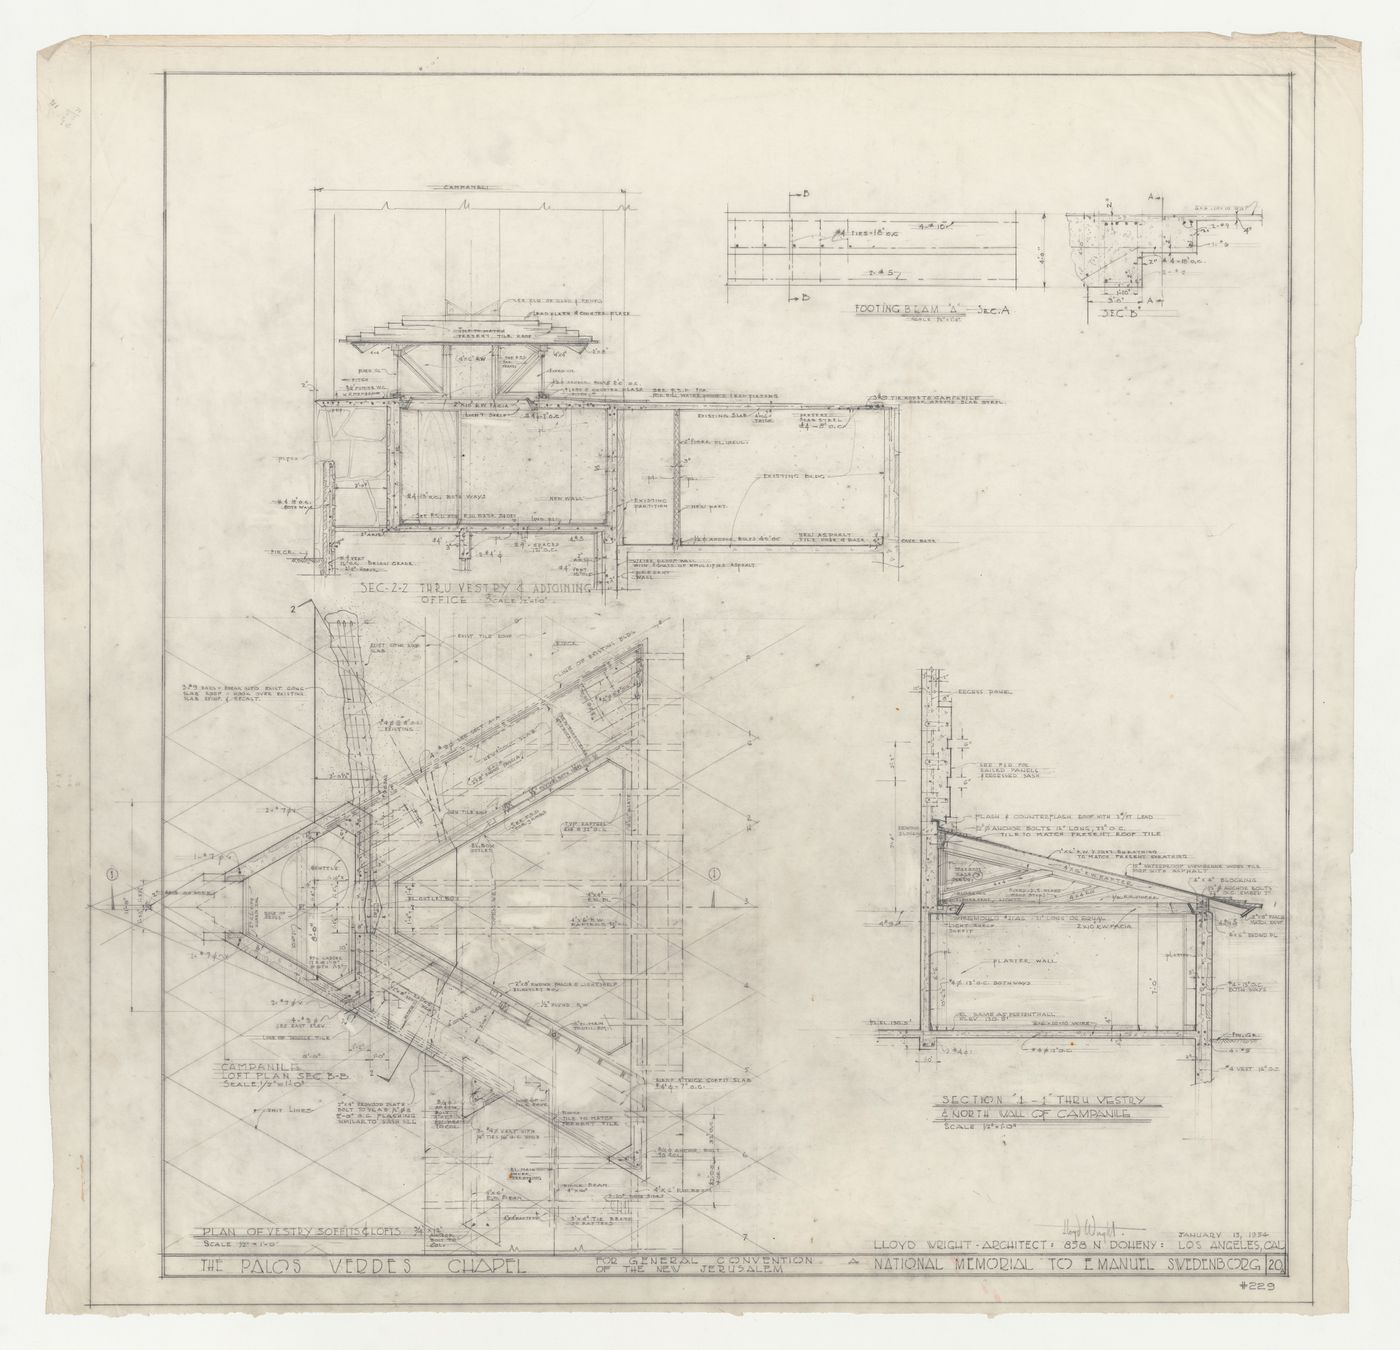 Wayfarers' Chapel, Palos Verdes, California: Plan for soffits and lofts for the vestry and campanile, sections through the vestry, and details for footing beams